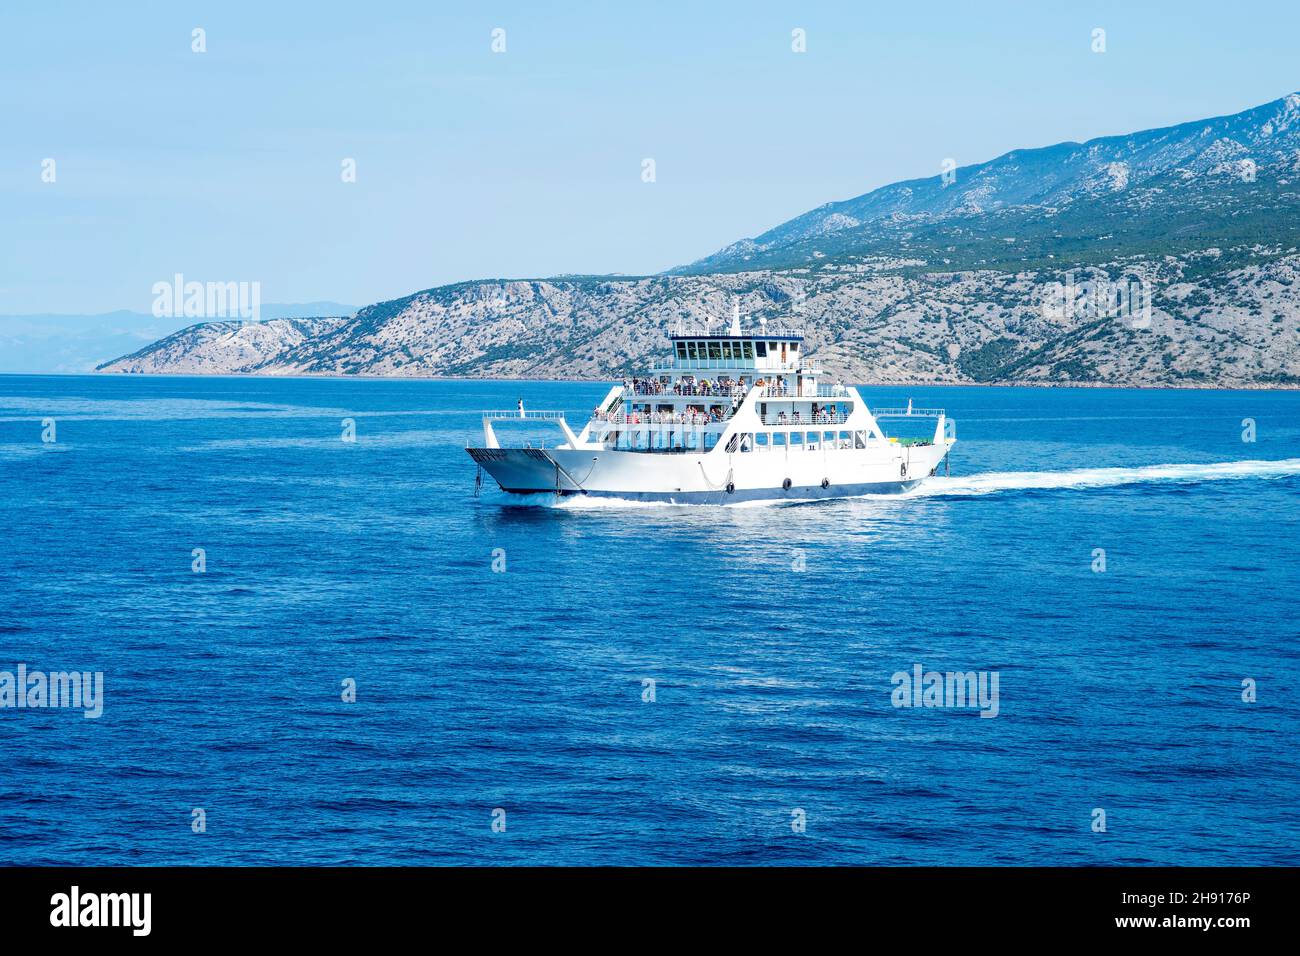 Car ferry boat in Croatia linking the island Rab to mainland passing by on adriatic sea. Stock Photo